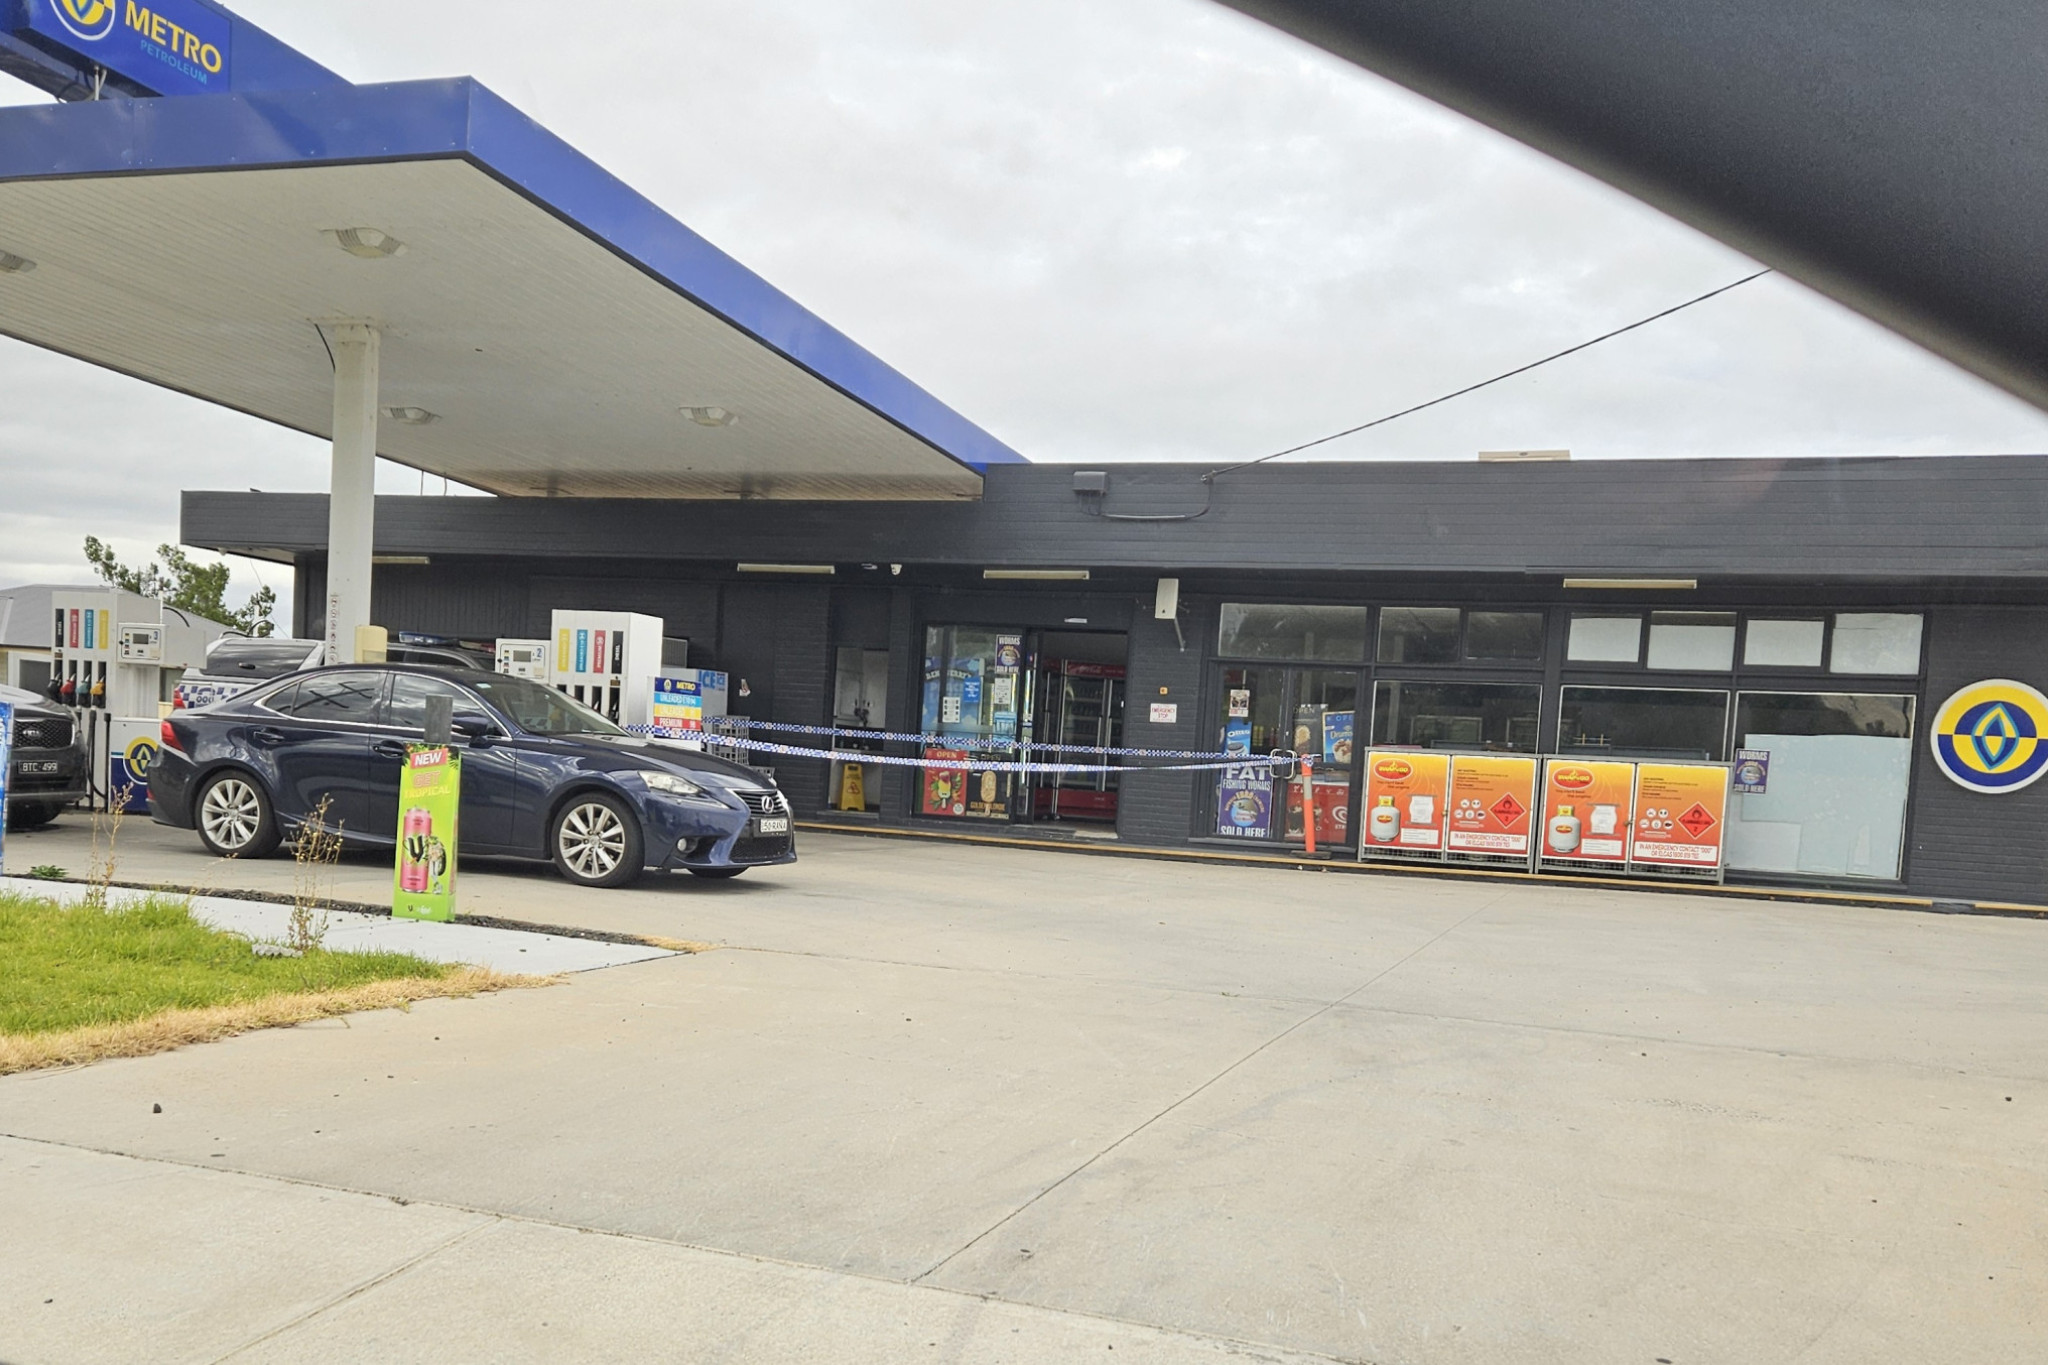 Dimboola's Metro service station was closed and taped off Monday morning while police investigated the scene